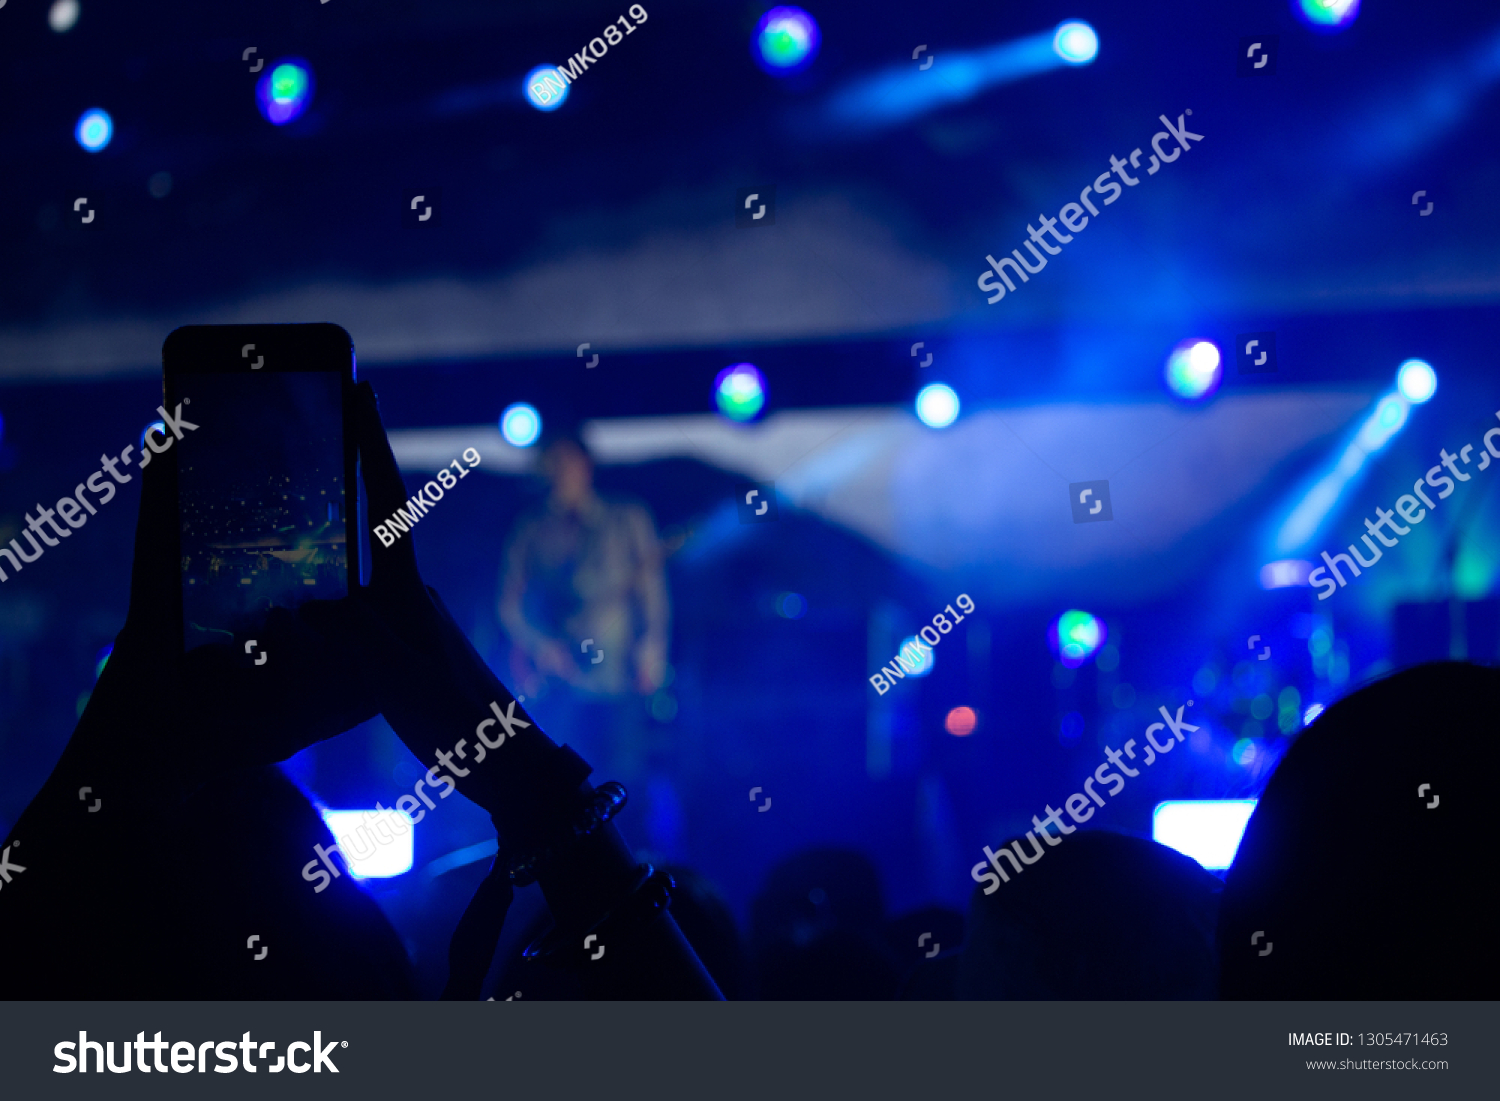 Hand with a smartphone records live music festival, Taking photo of concert stage, live concert, music festival #1305471463